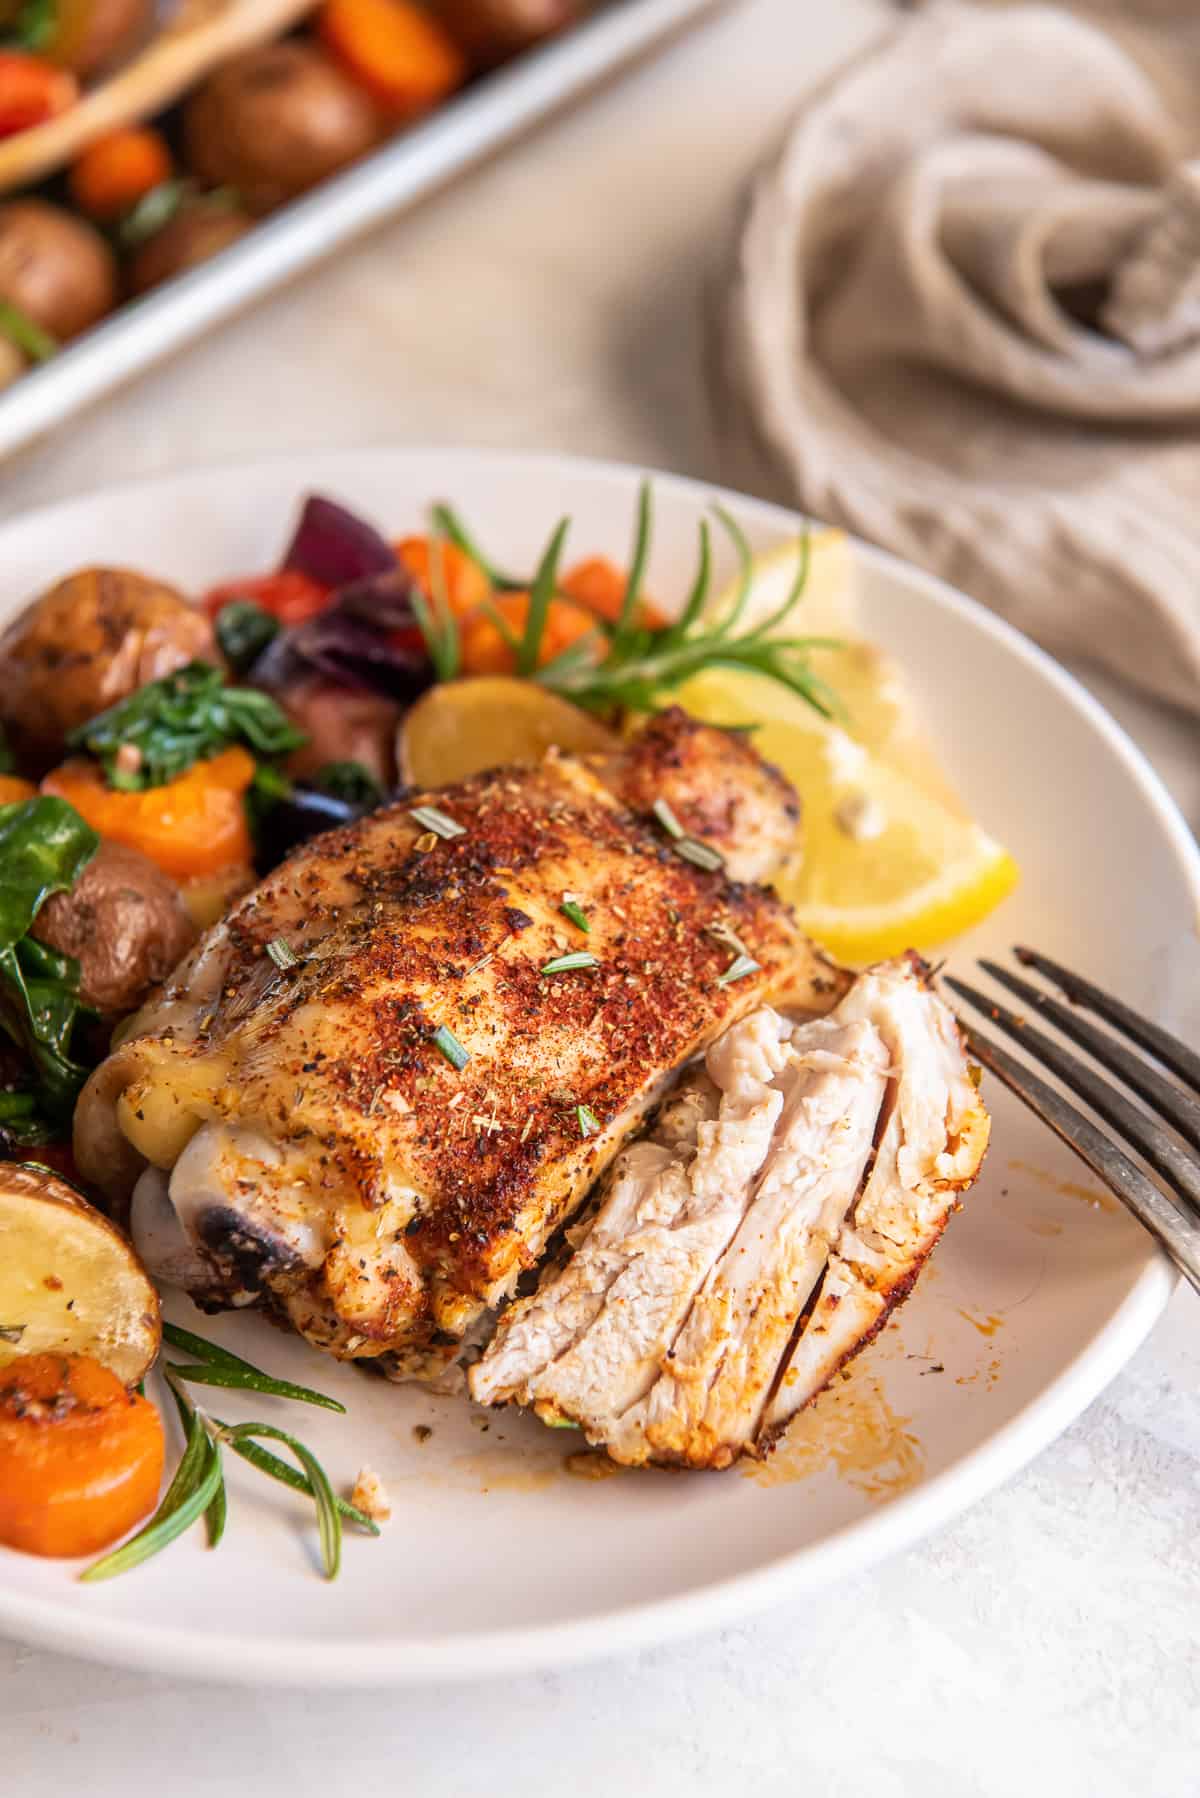 Sliced chicken thigh on a white plate with roasted vegetables.